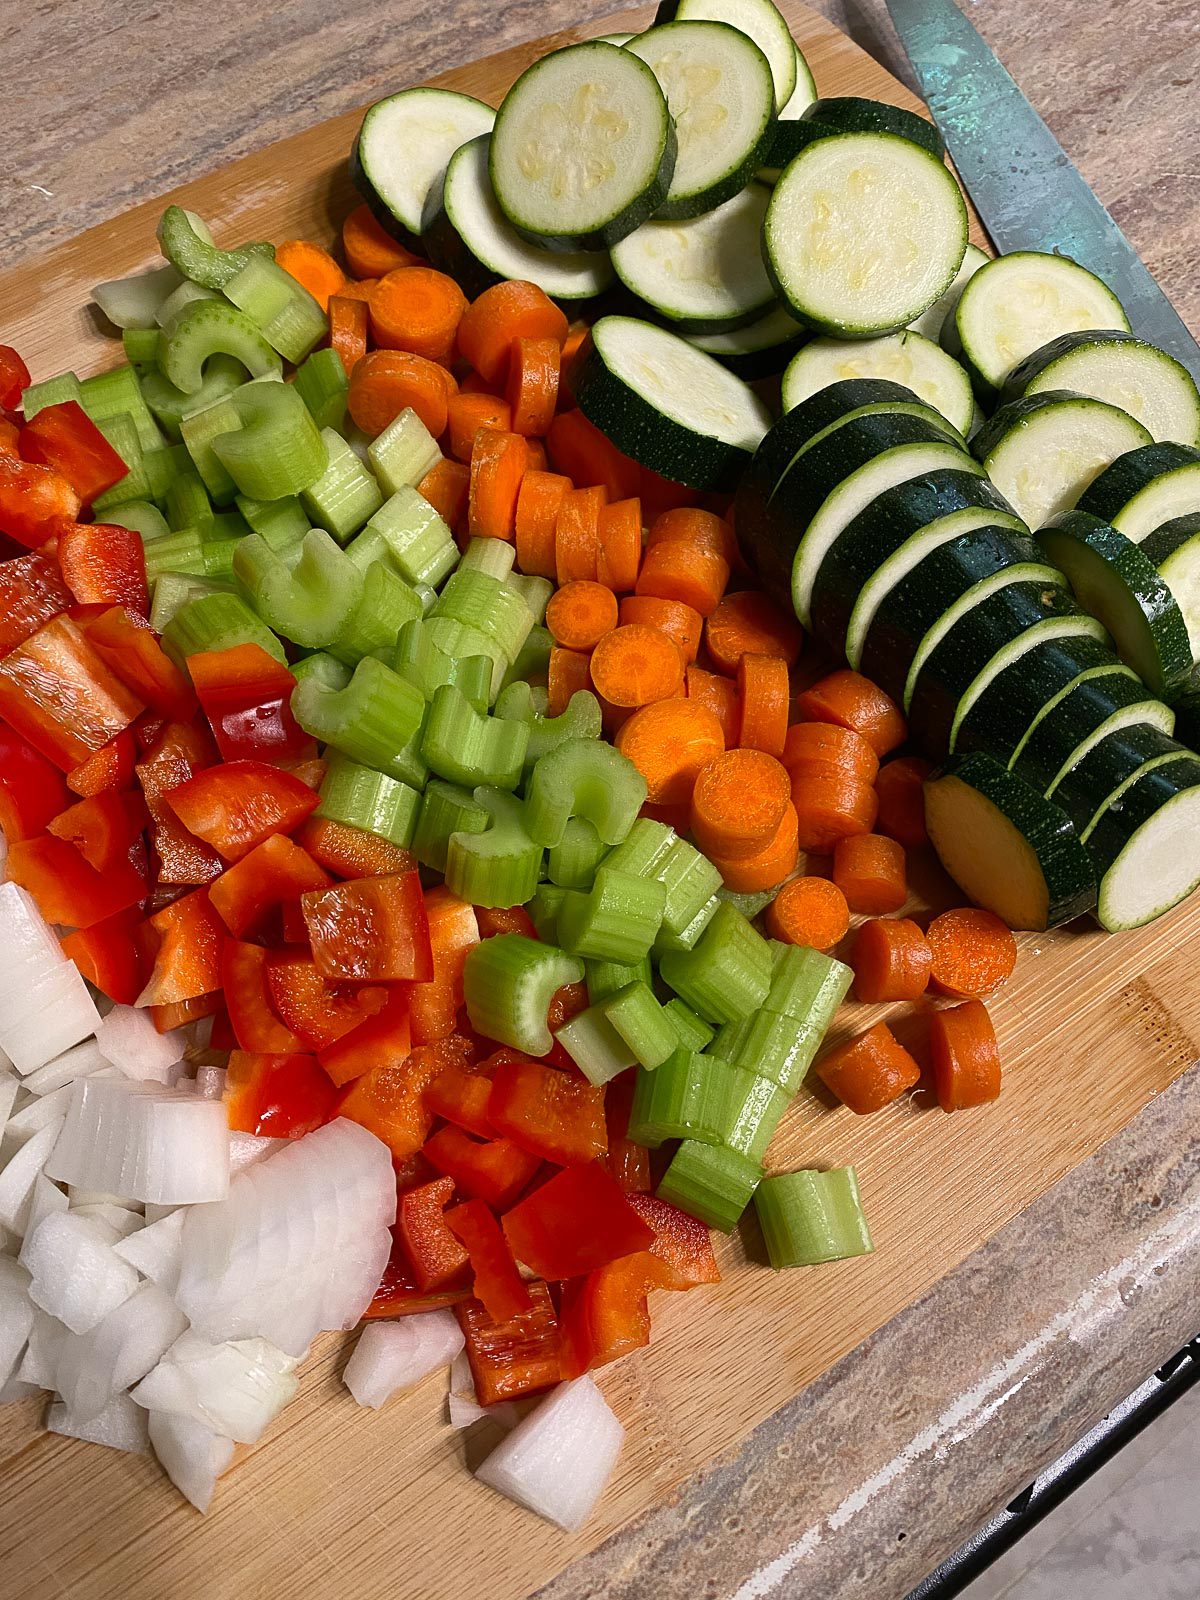 chopped and cut ingredients for vegetable stew against cutting board